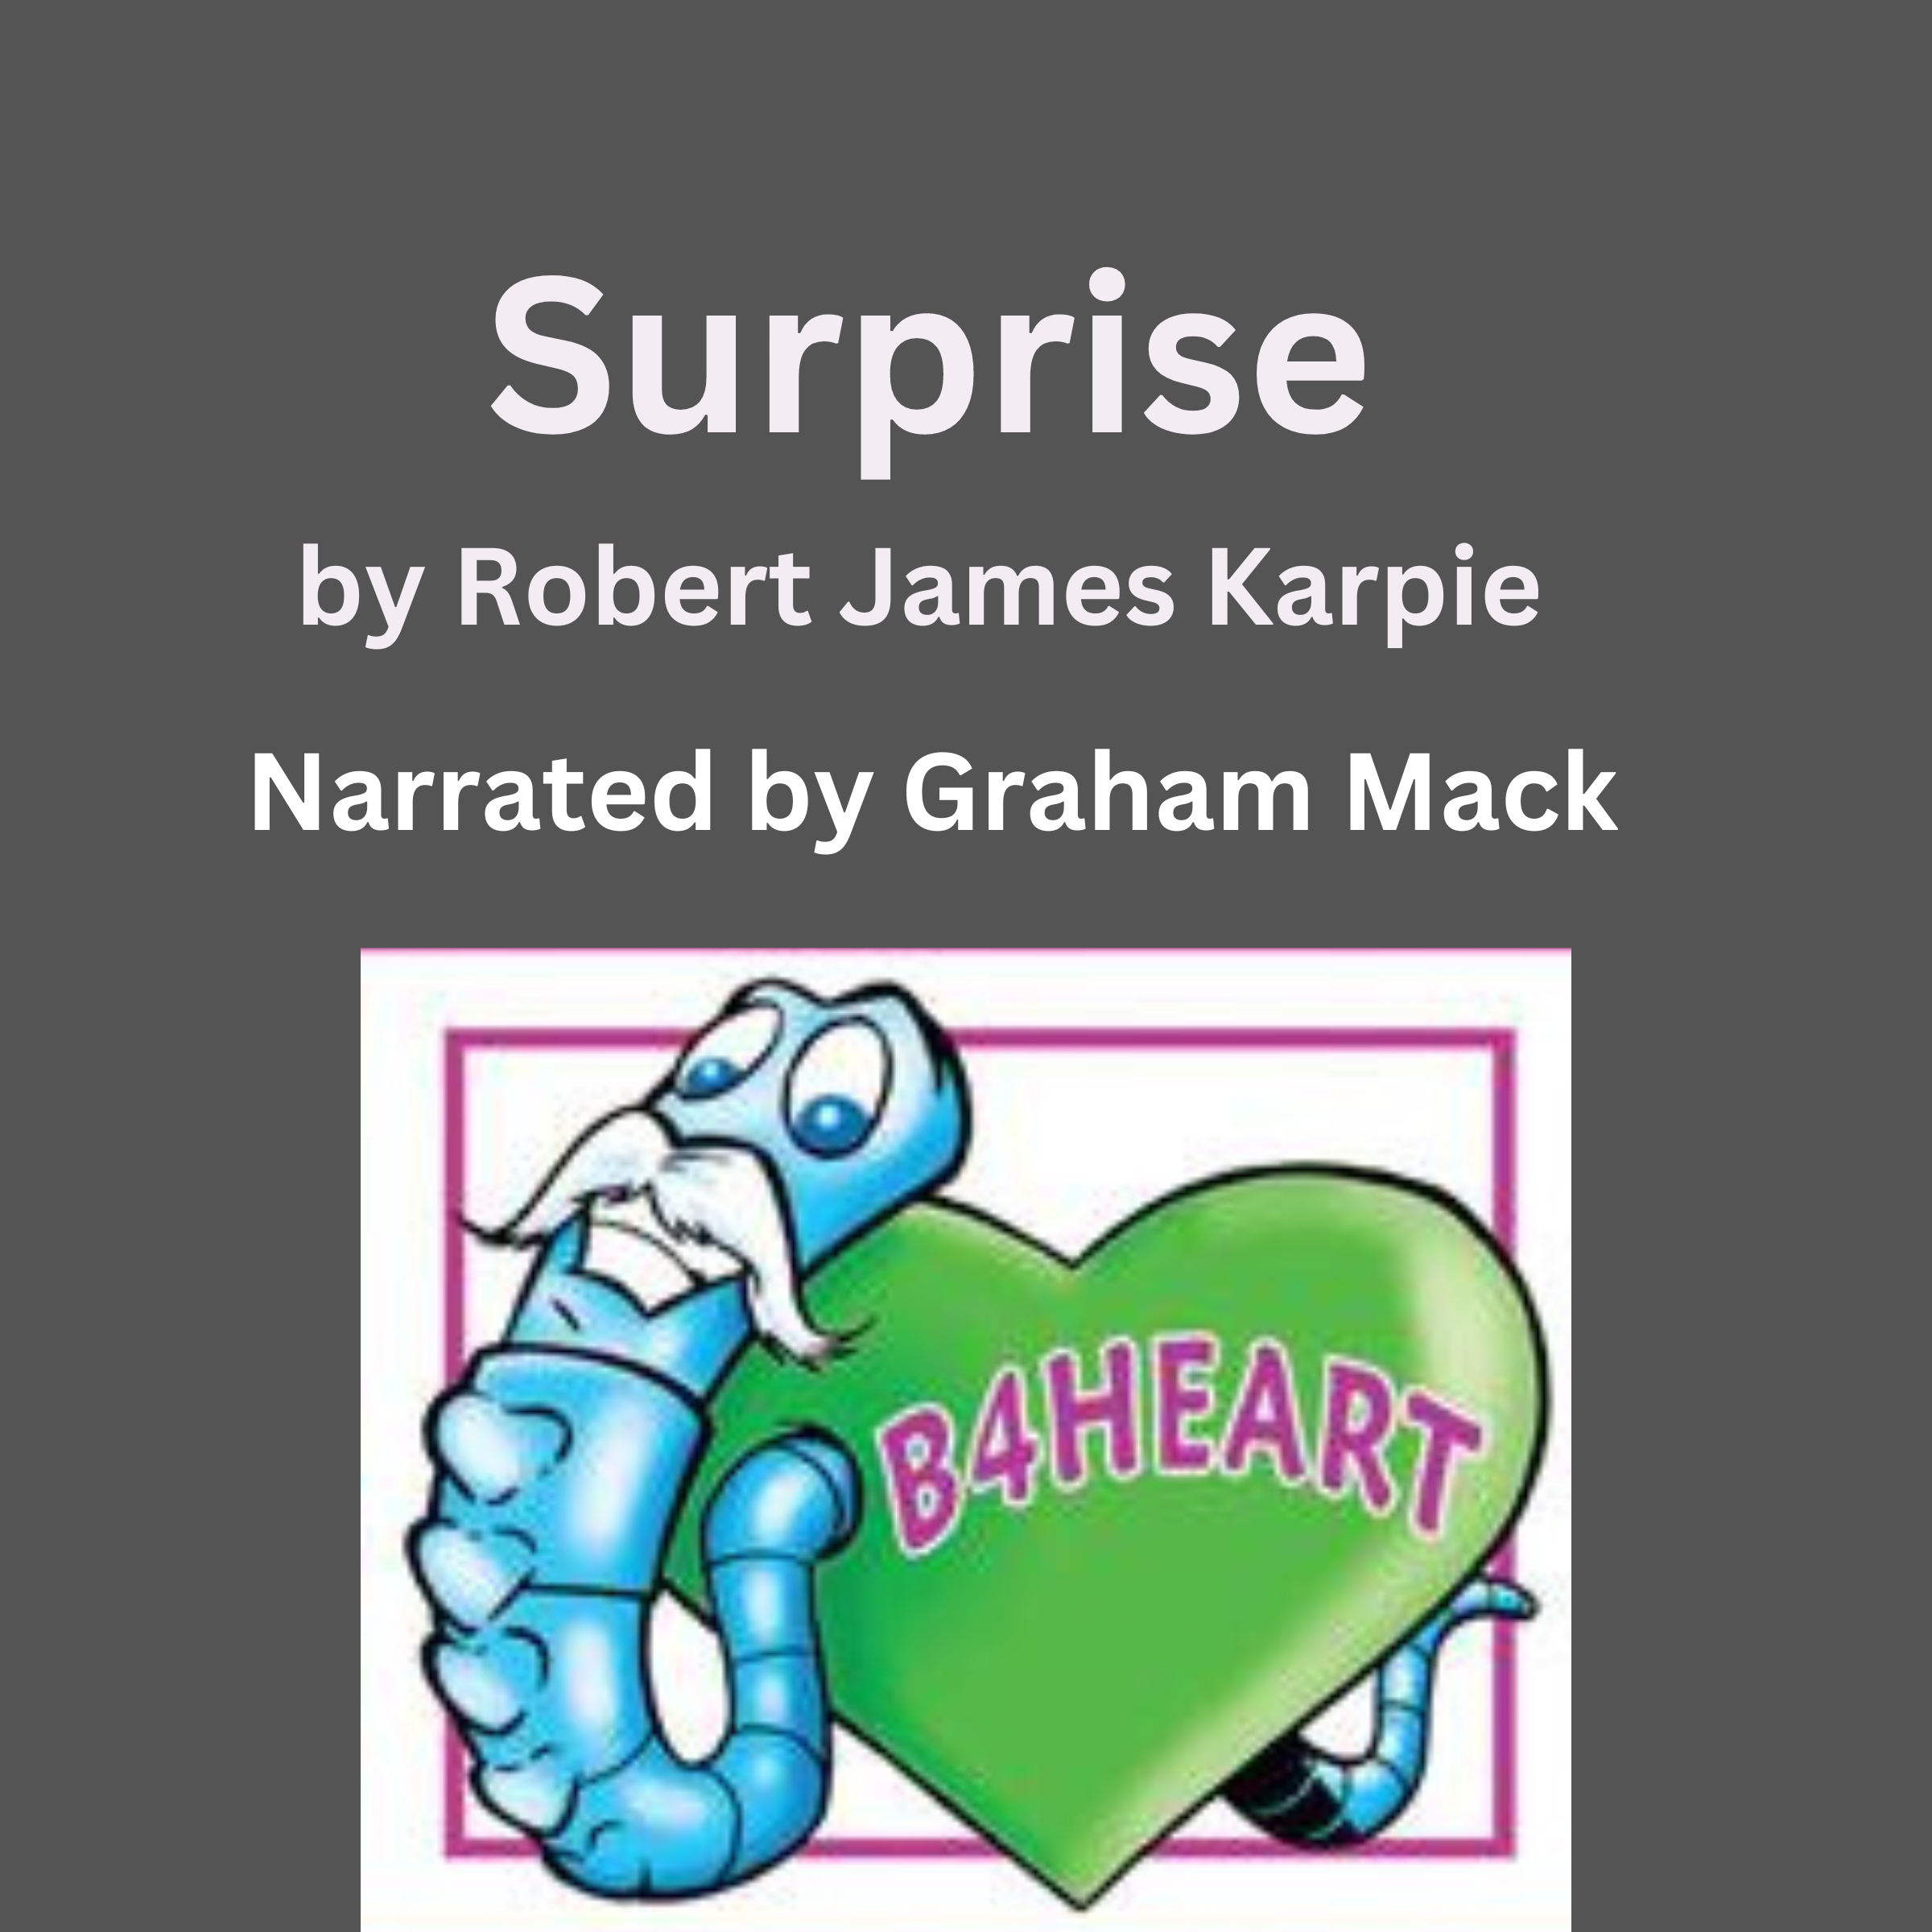 surprise-by-robert-james-karpie-narrated-by-graham-mack-untitled-2400-2400-px-.png